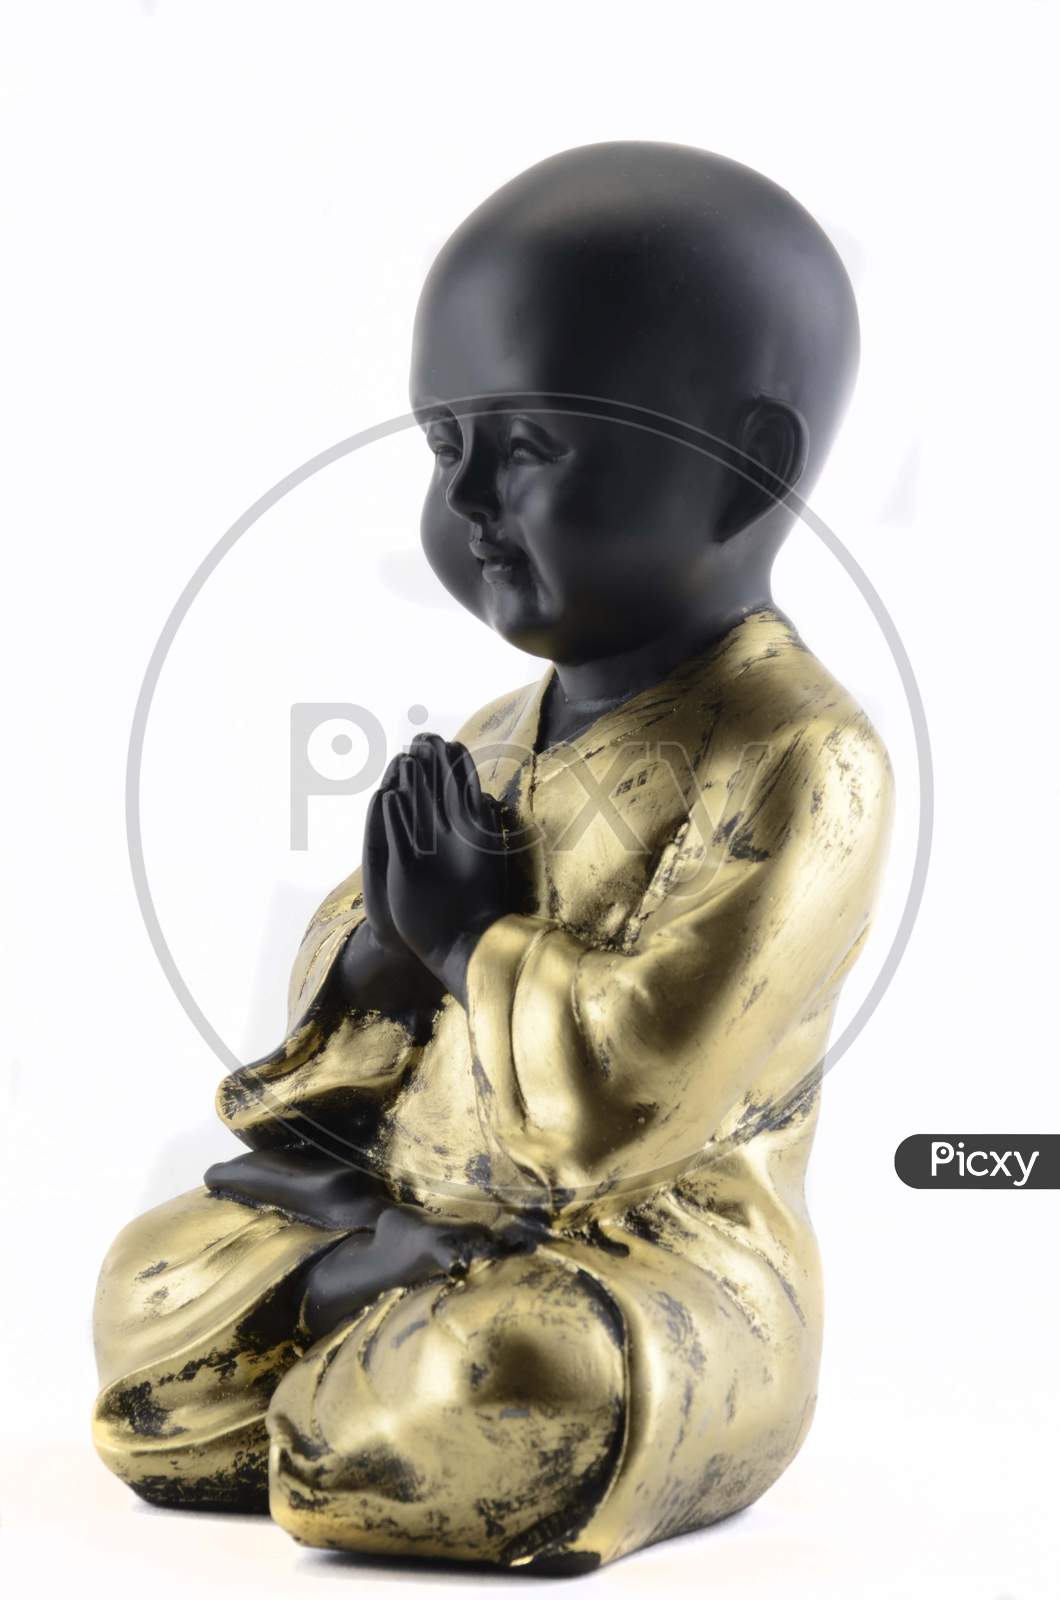 Chinese Boy Action Figure With Namaste Gesture Or Welcoming Gesture Over An Isolated White background